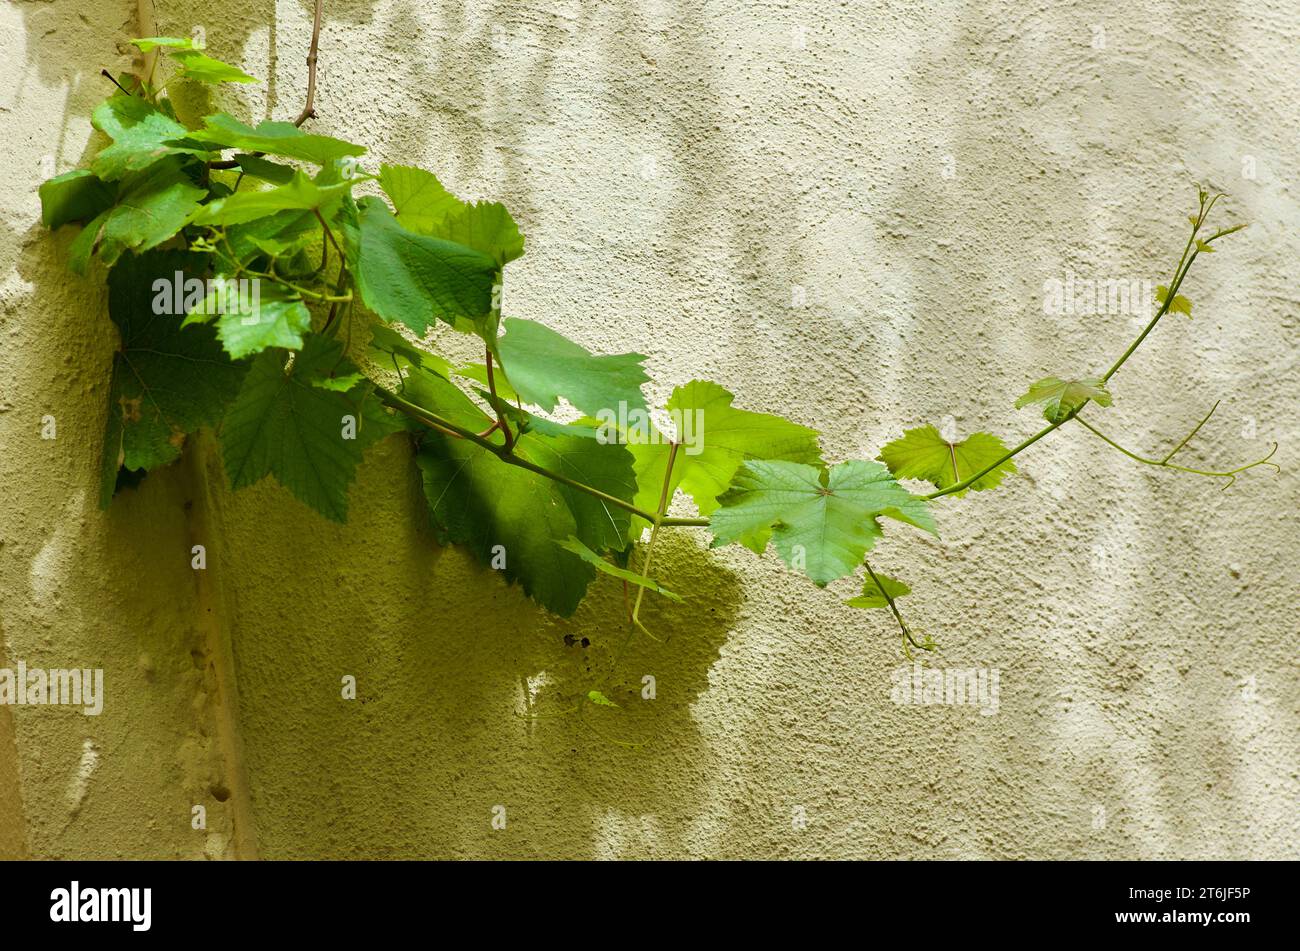 Green vine plant with branches climbing on a building with stone walls on the island Malta in spring. Stock Photo